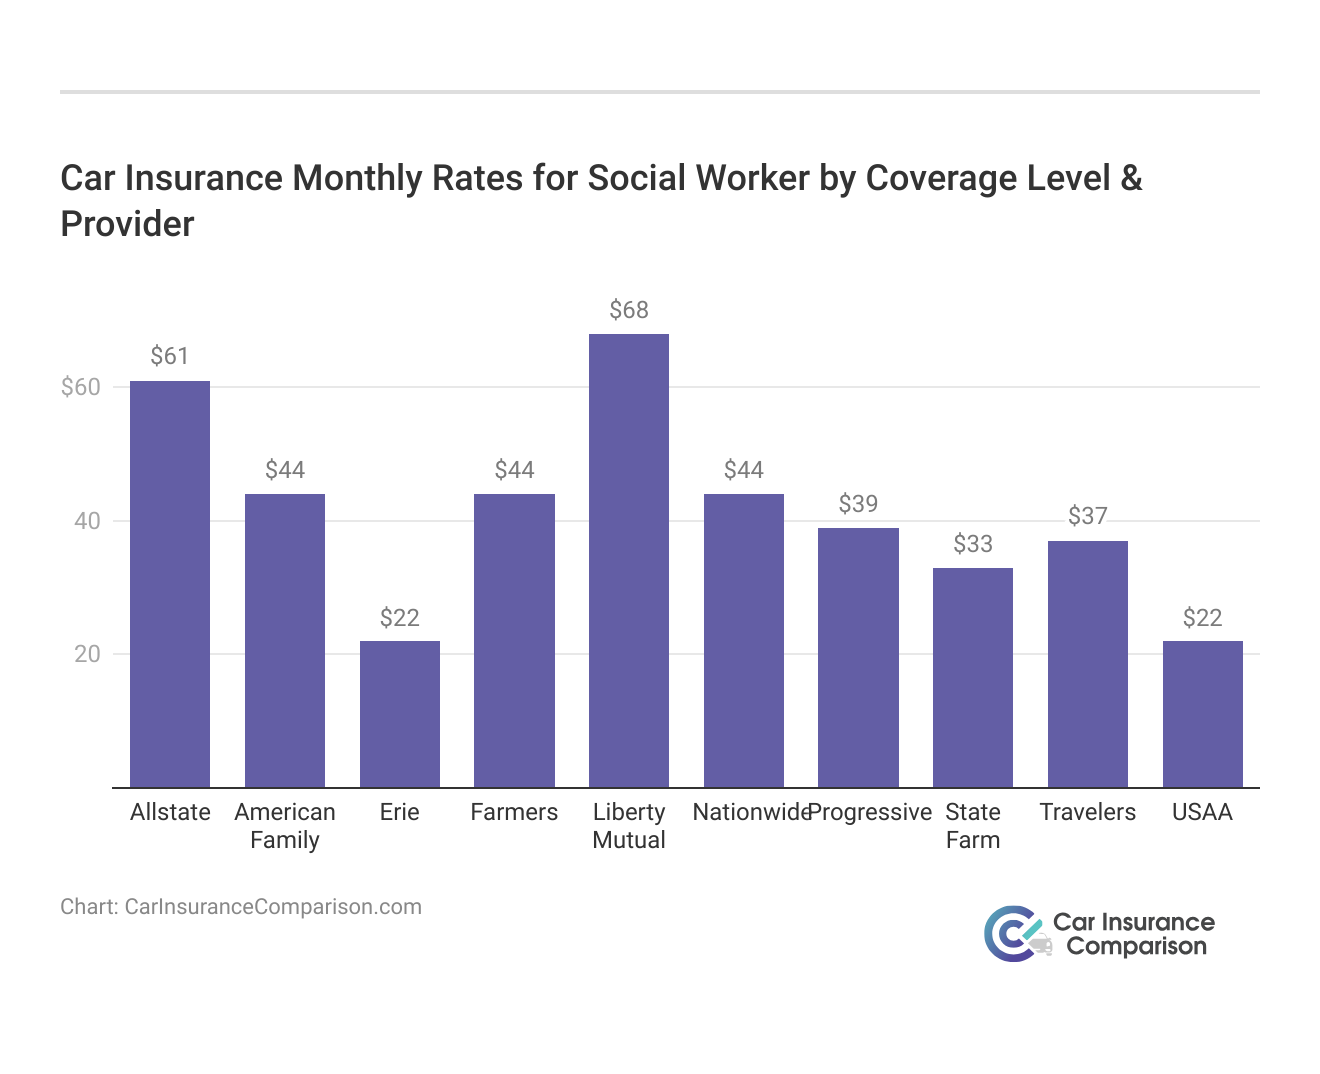 <h3>Car Insurance Monthly Rates for Social Worker by Coverage Level & Provider</h3>